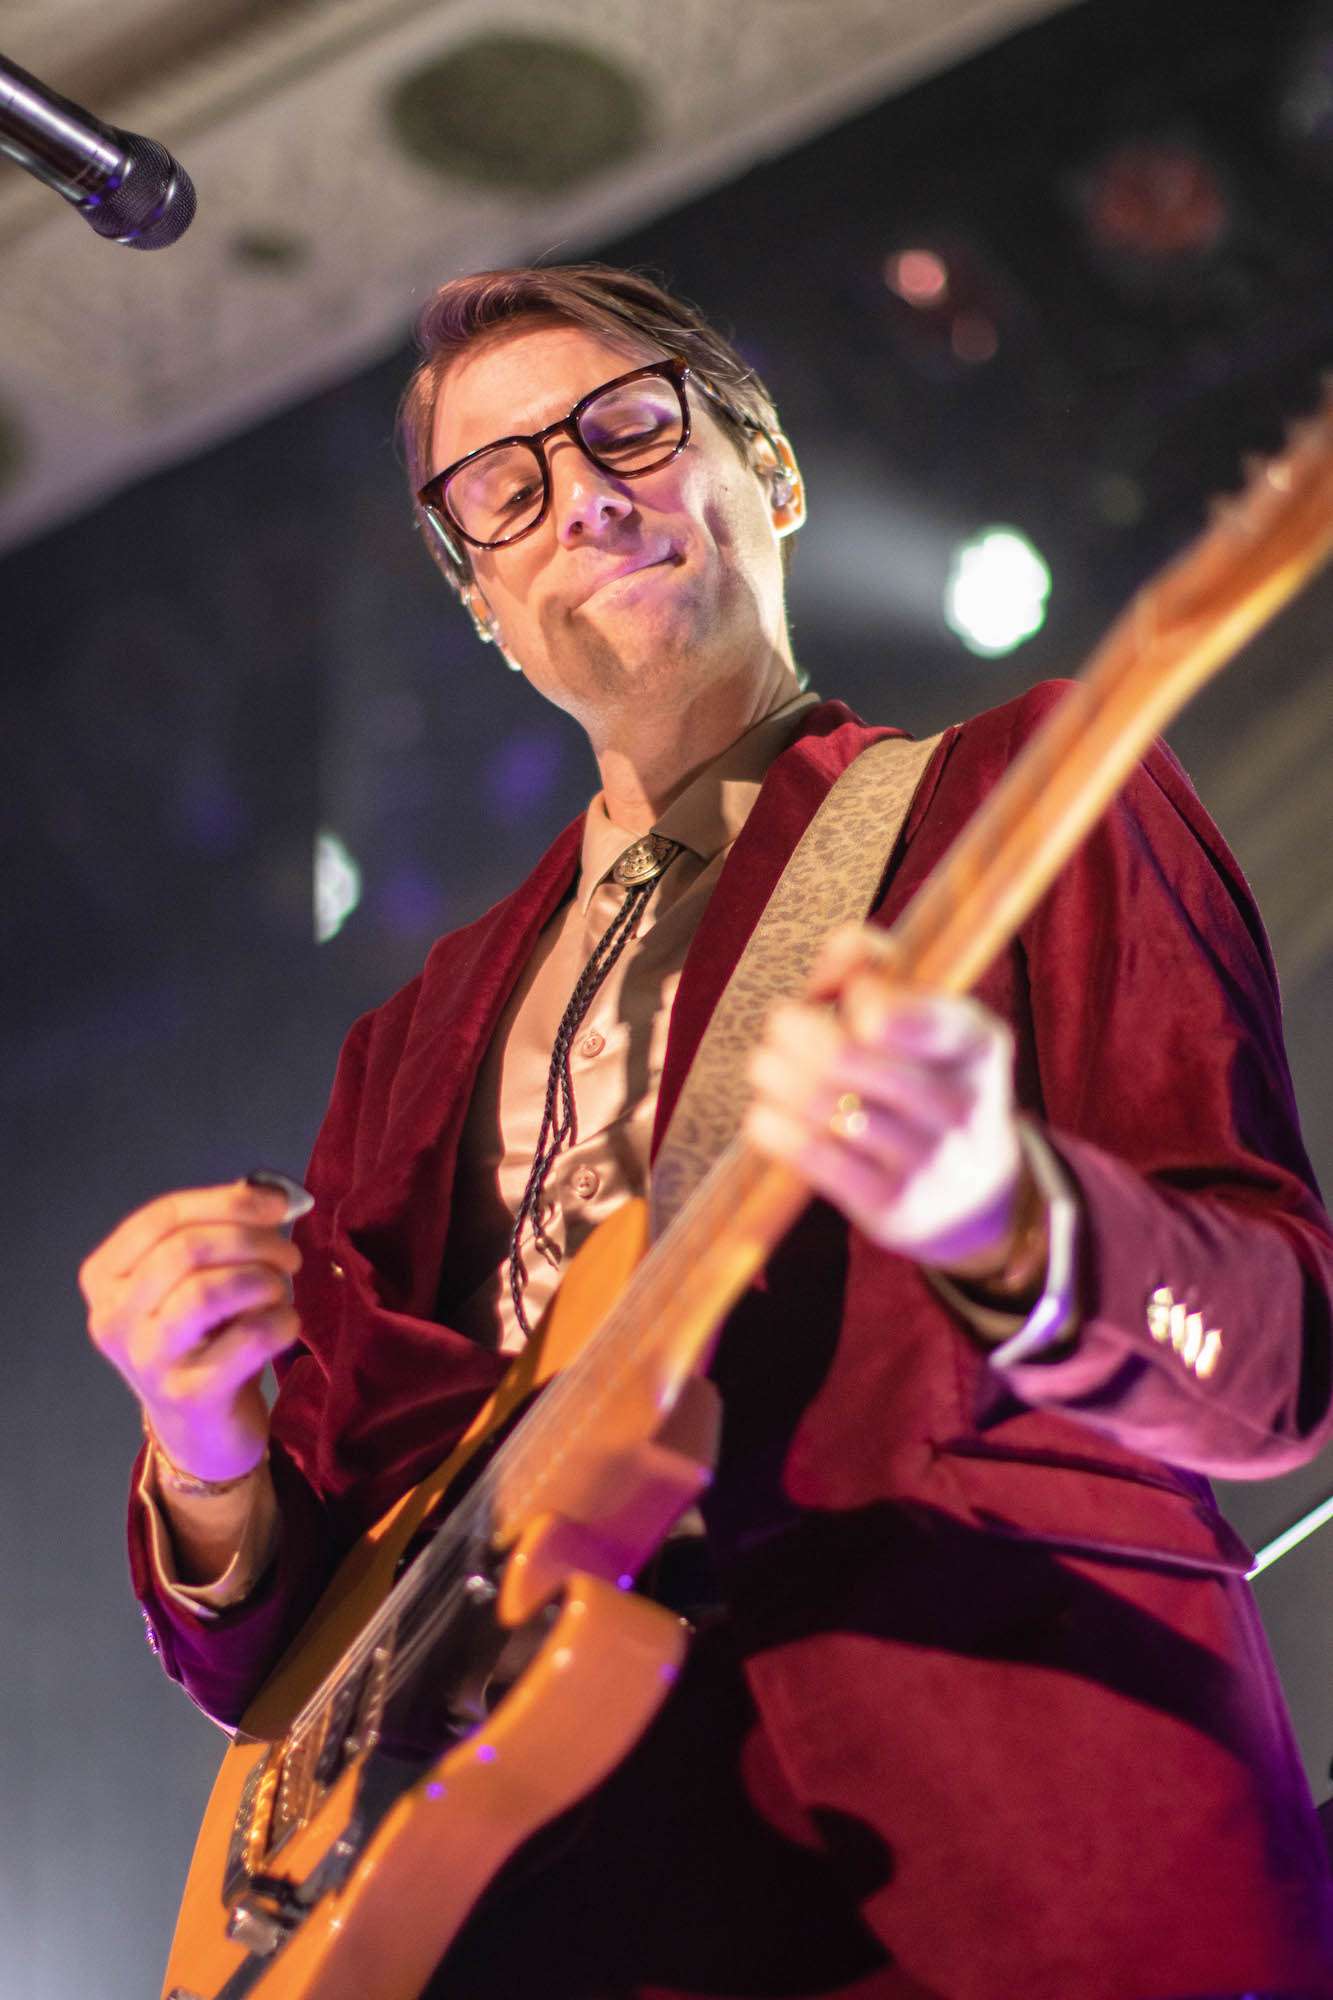 The Award Show Tour: Saint Motel Kicks Off with Fan-Voted Setlist and Cinematic Performances 4